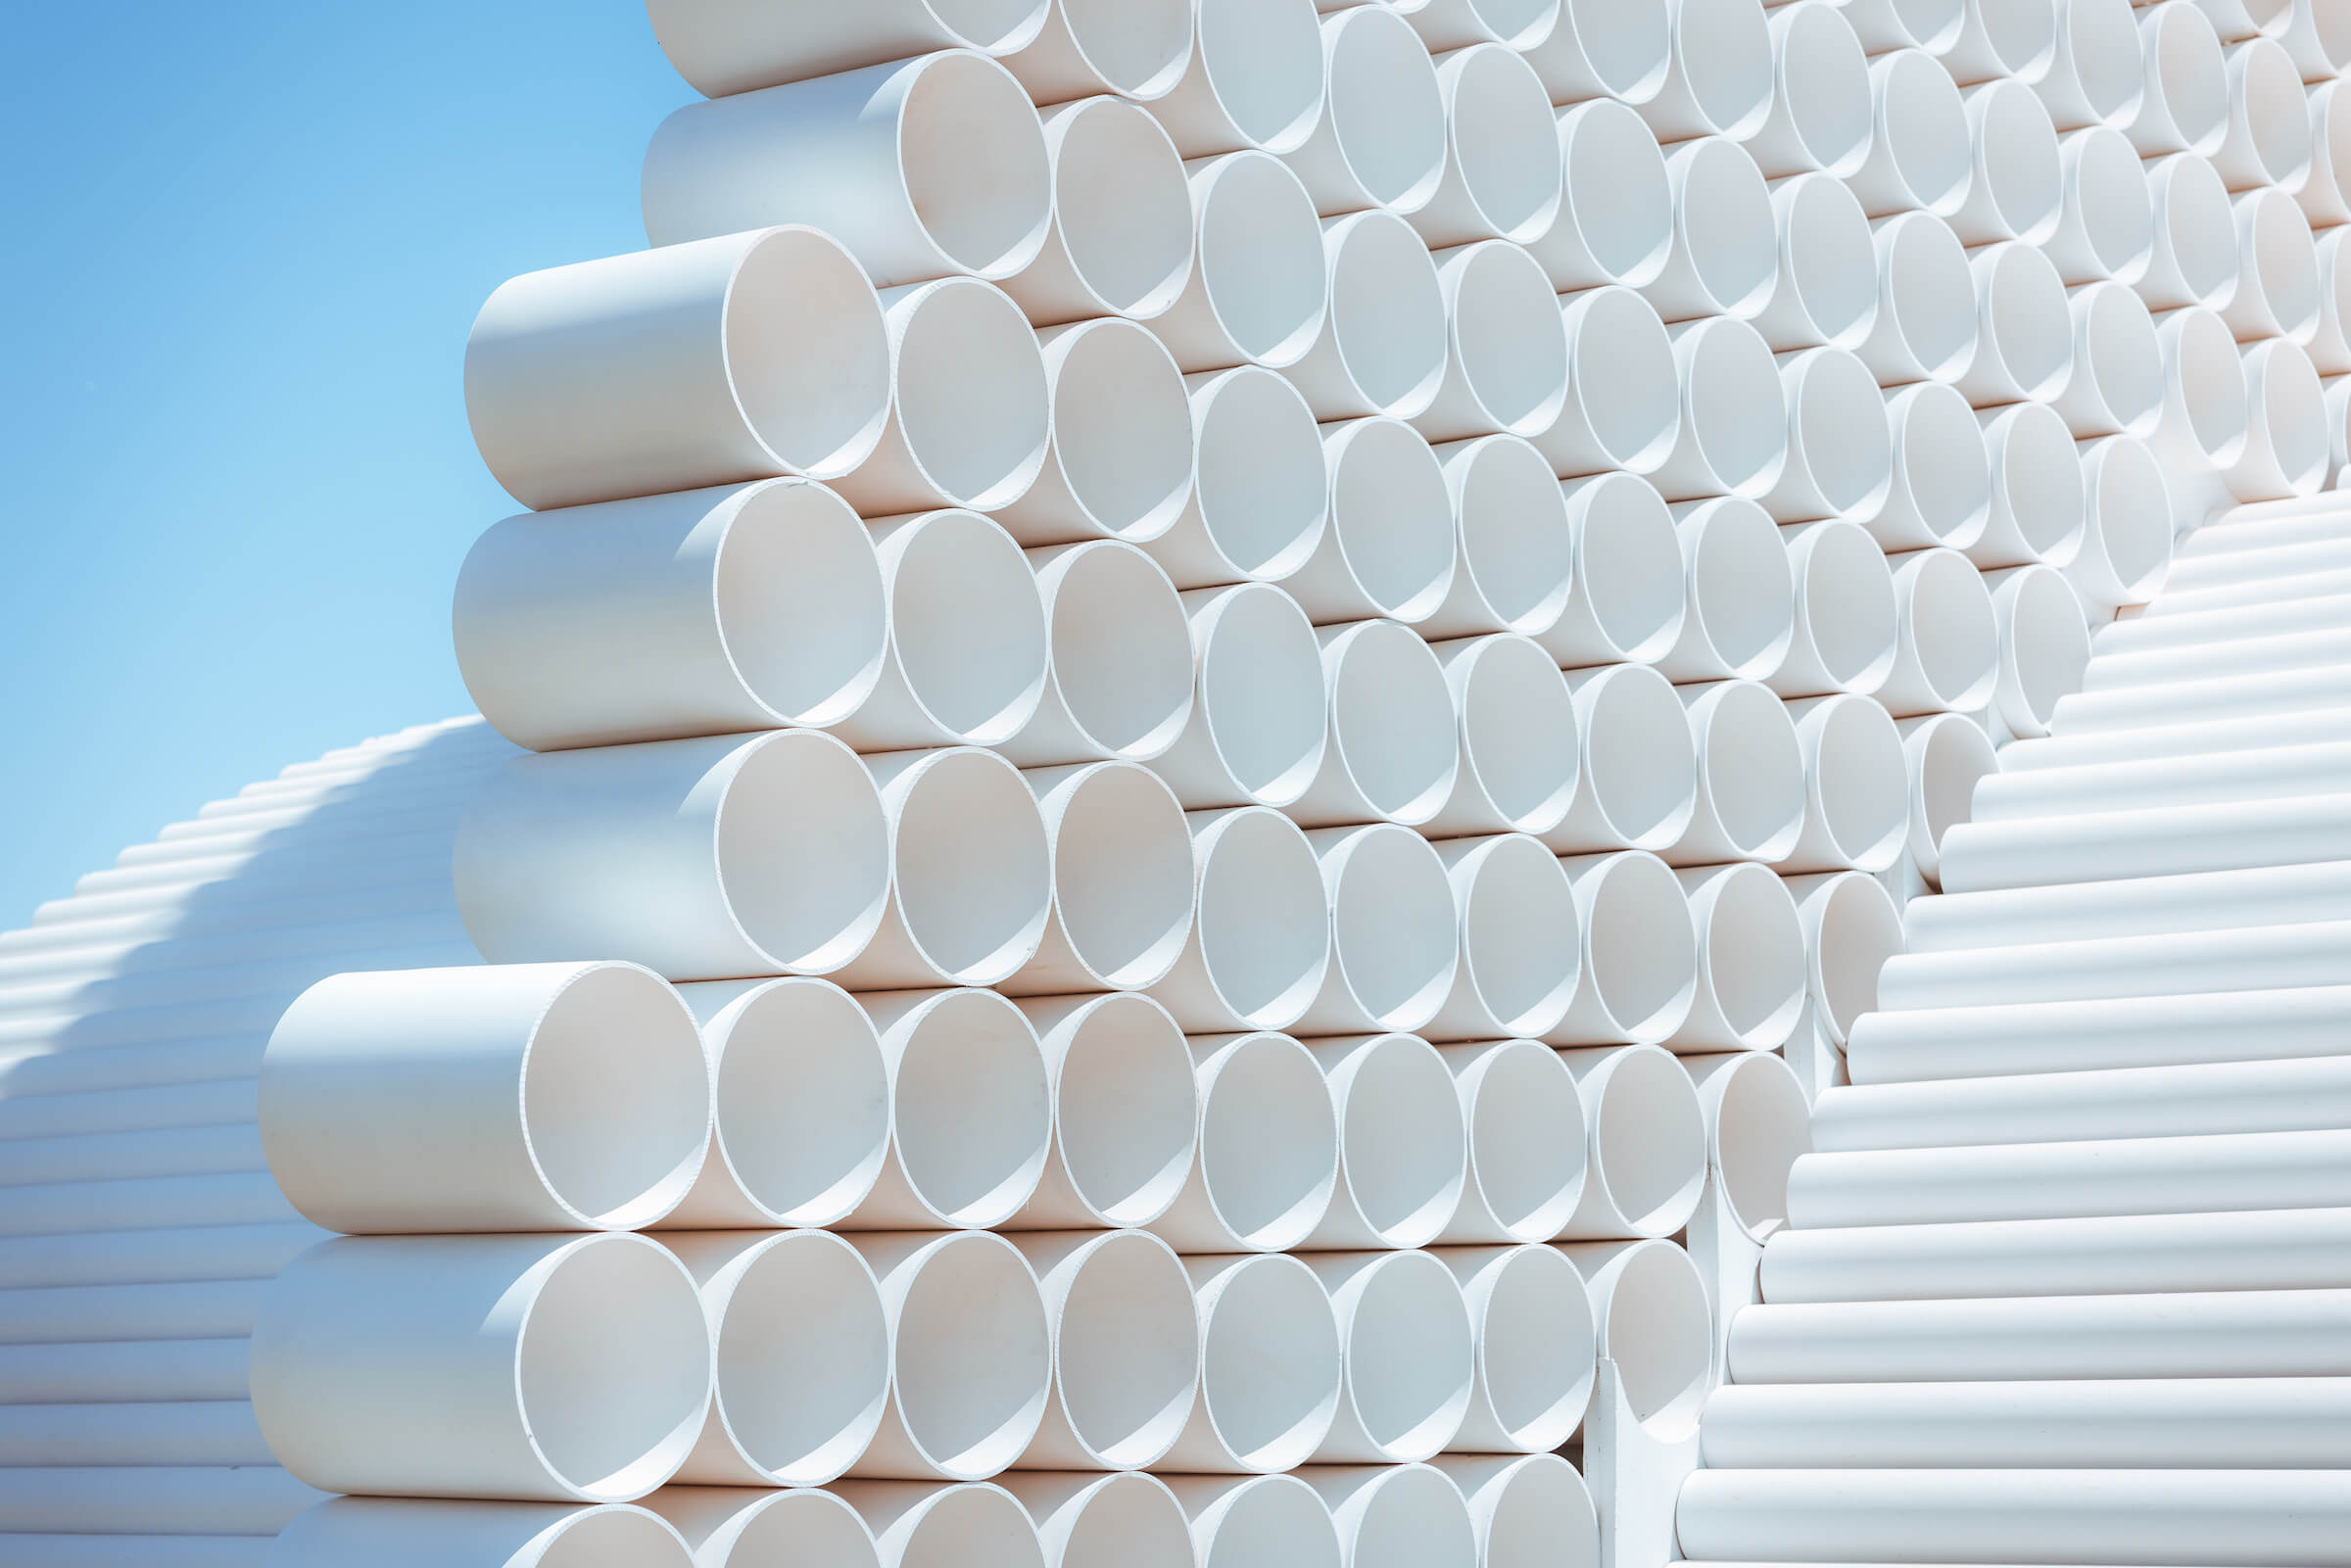 detail view of an art installation constructed from white pvc pipes